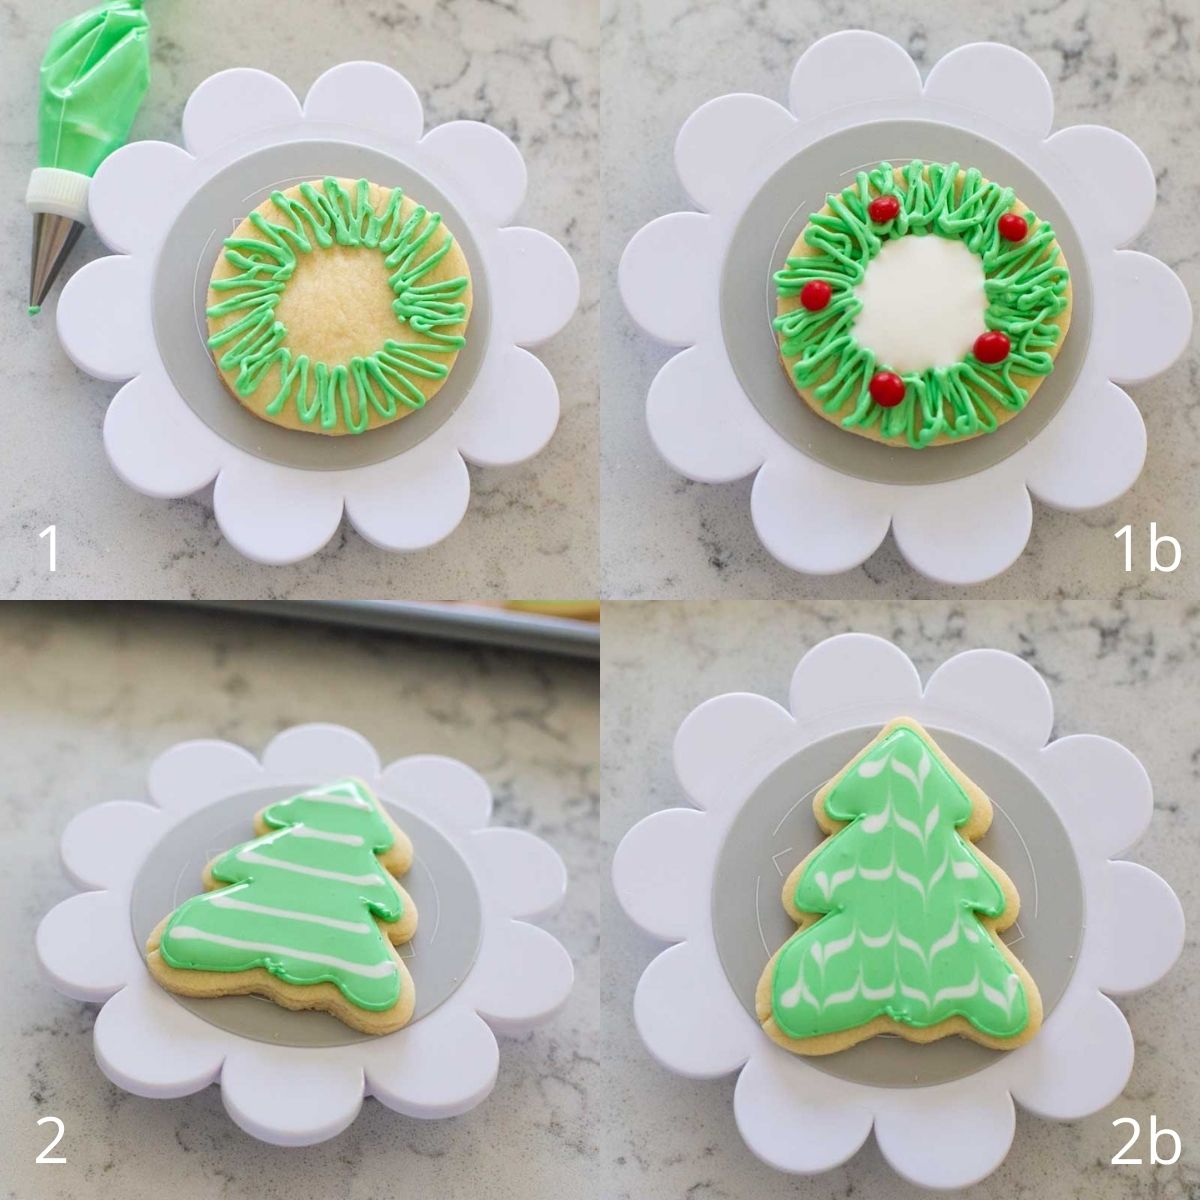 A step by step photo collage shows two more easy variations for decorating sugar cookies with royal icing.